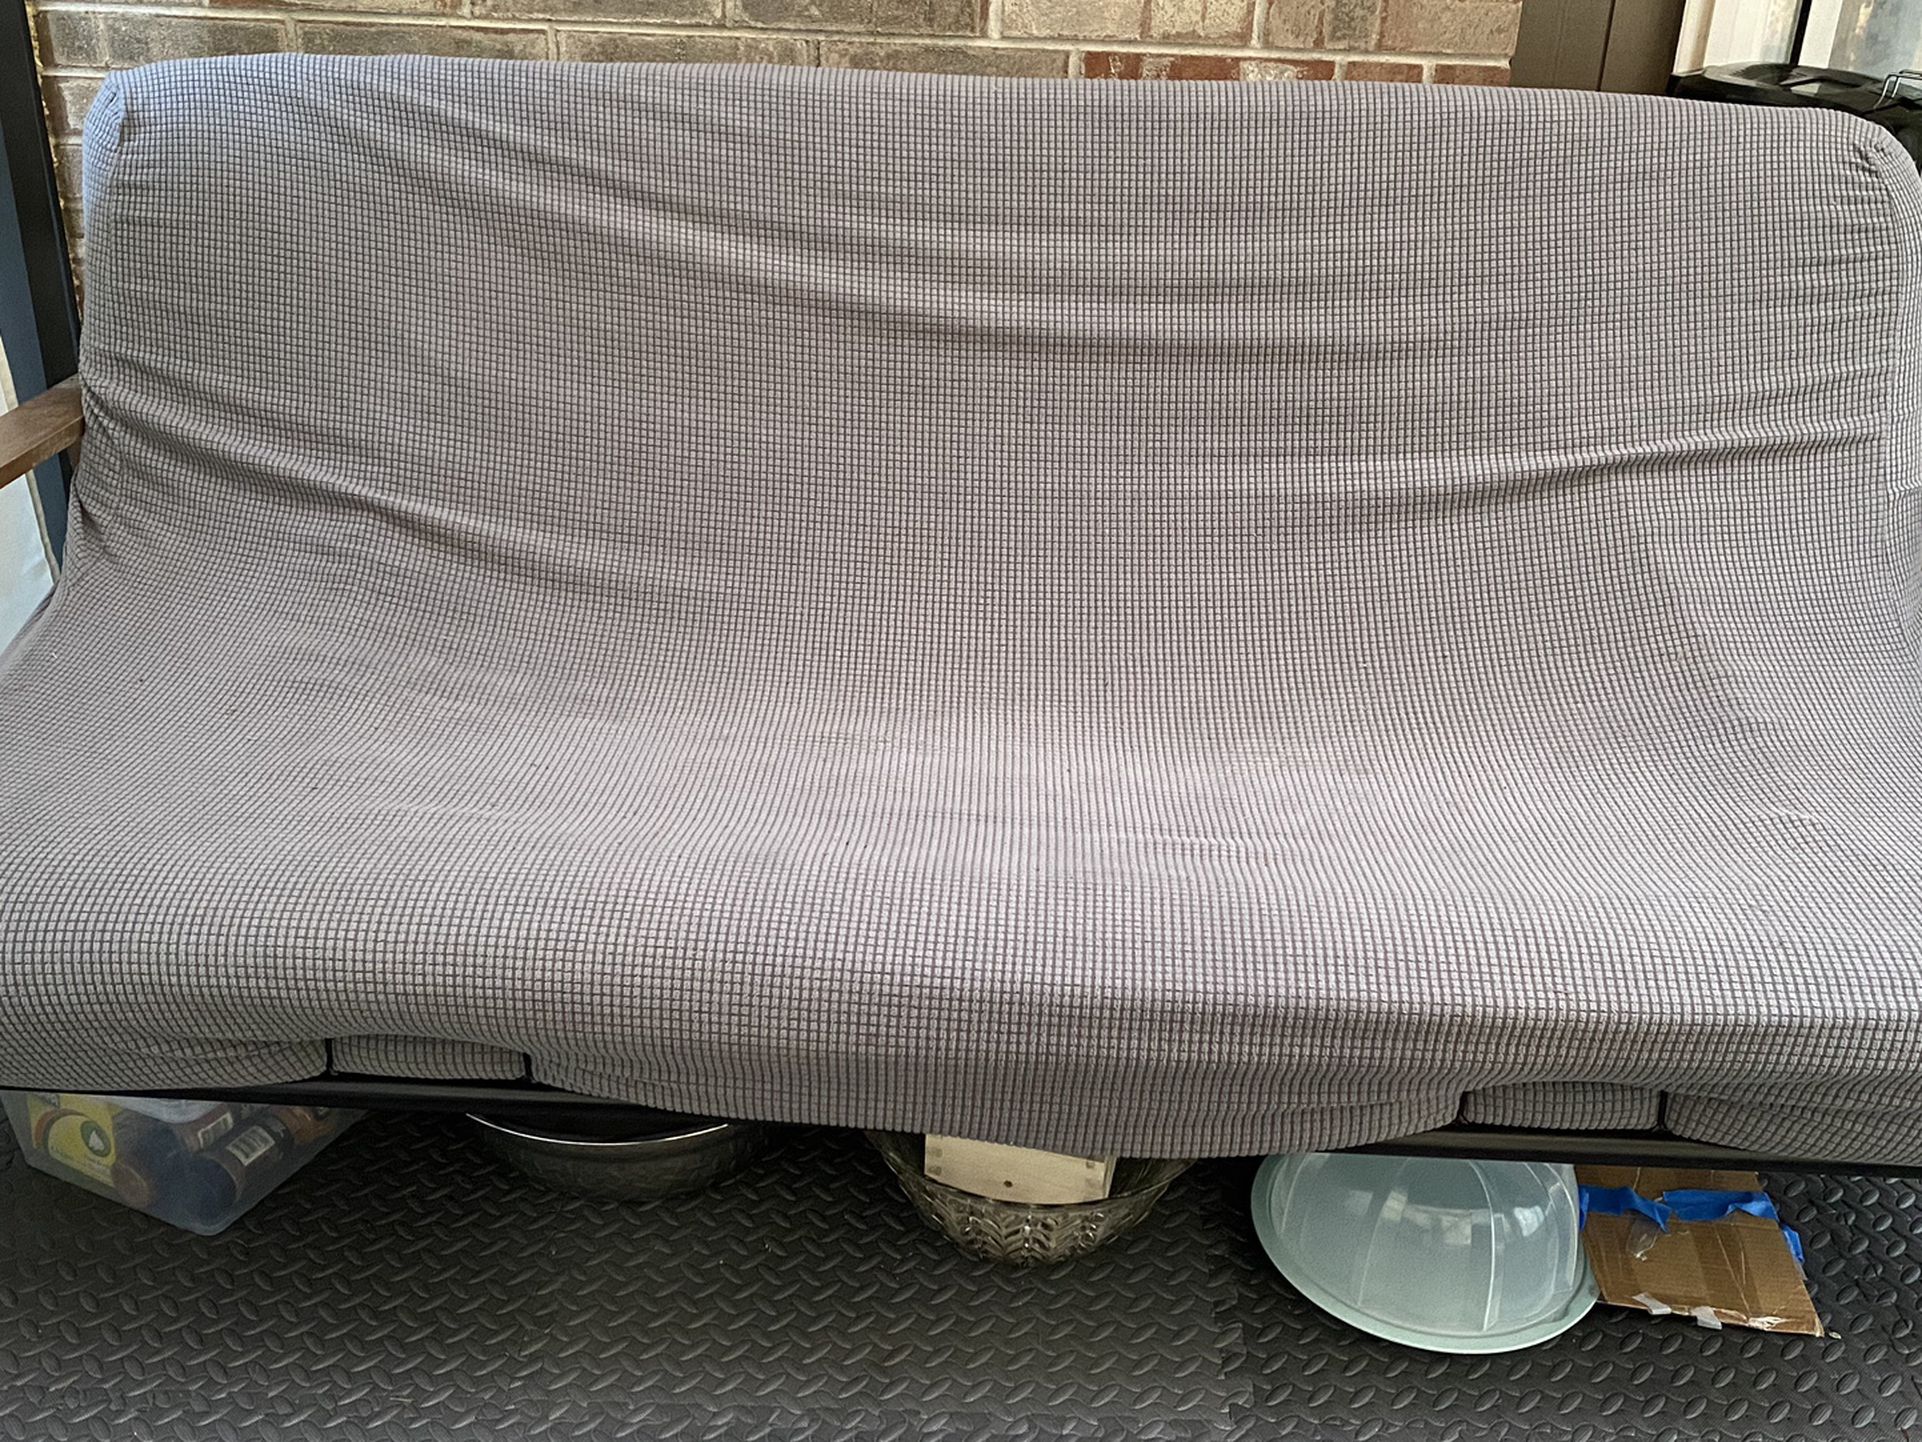 Firm Clean Futon With Cover